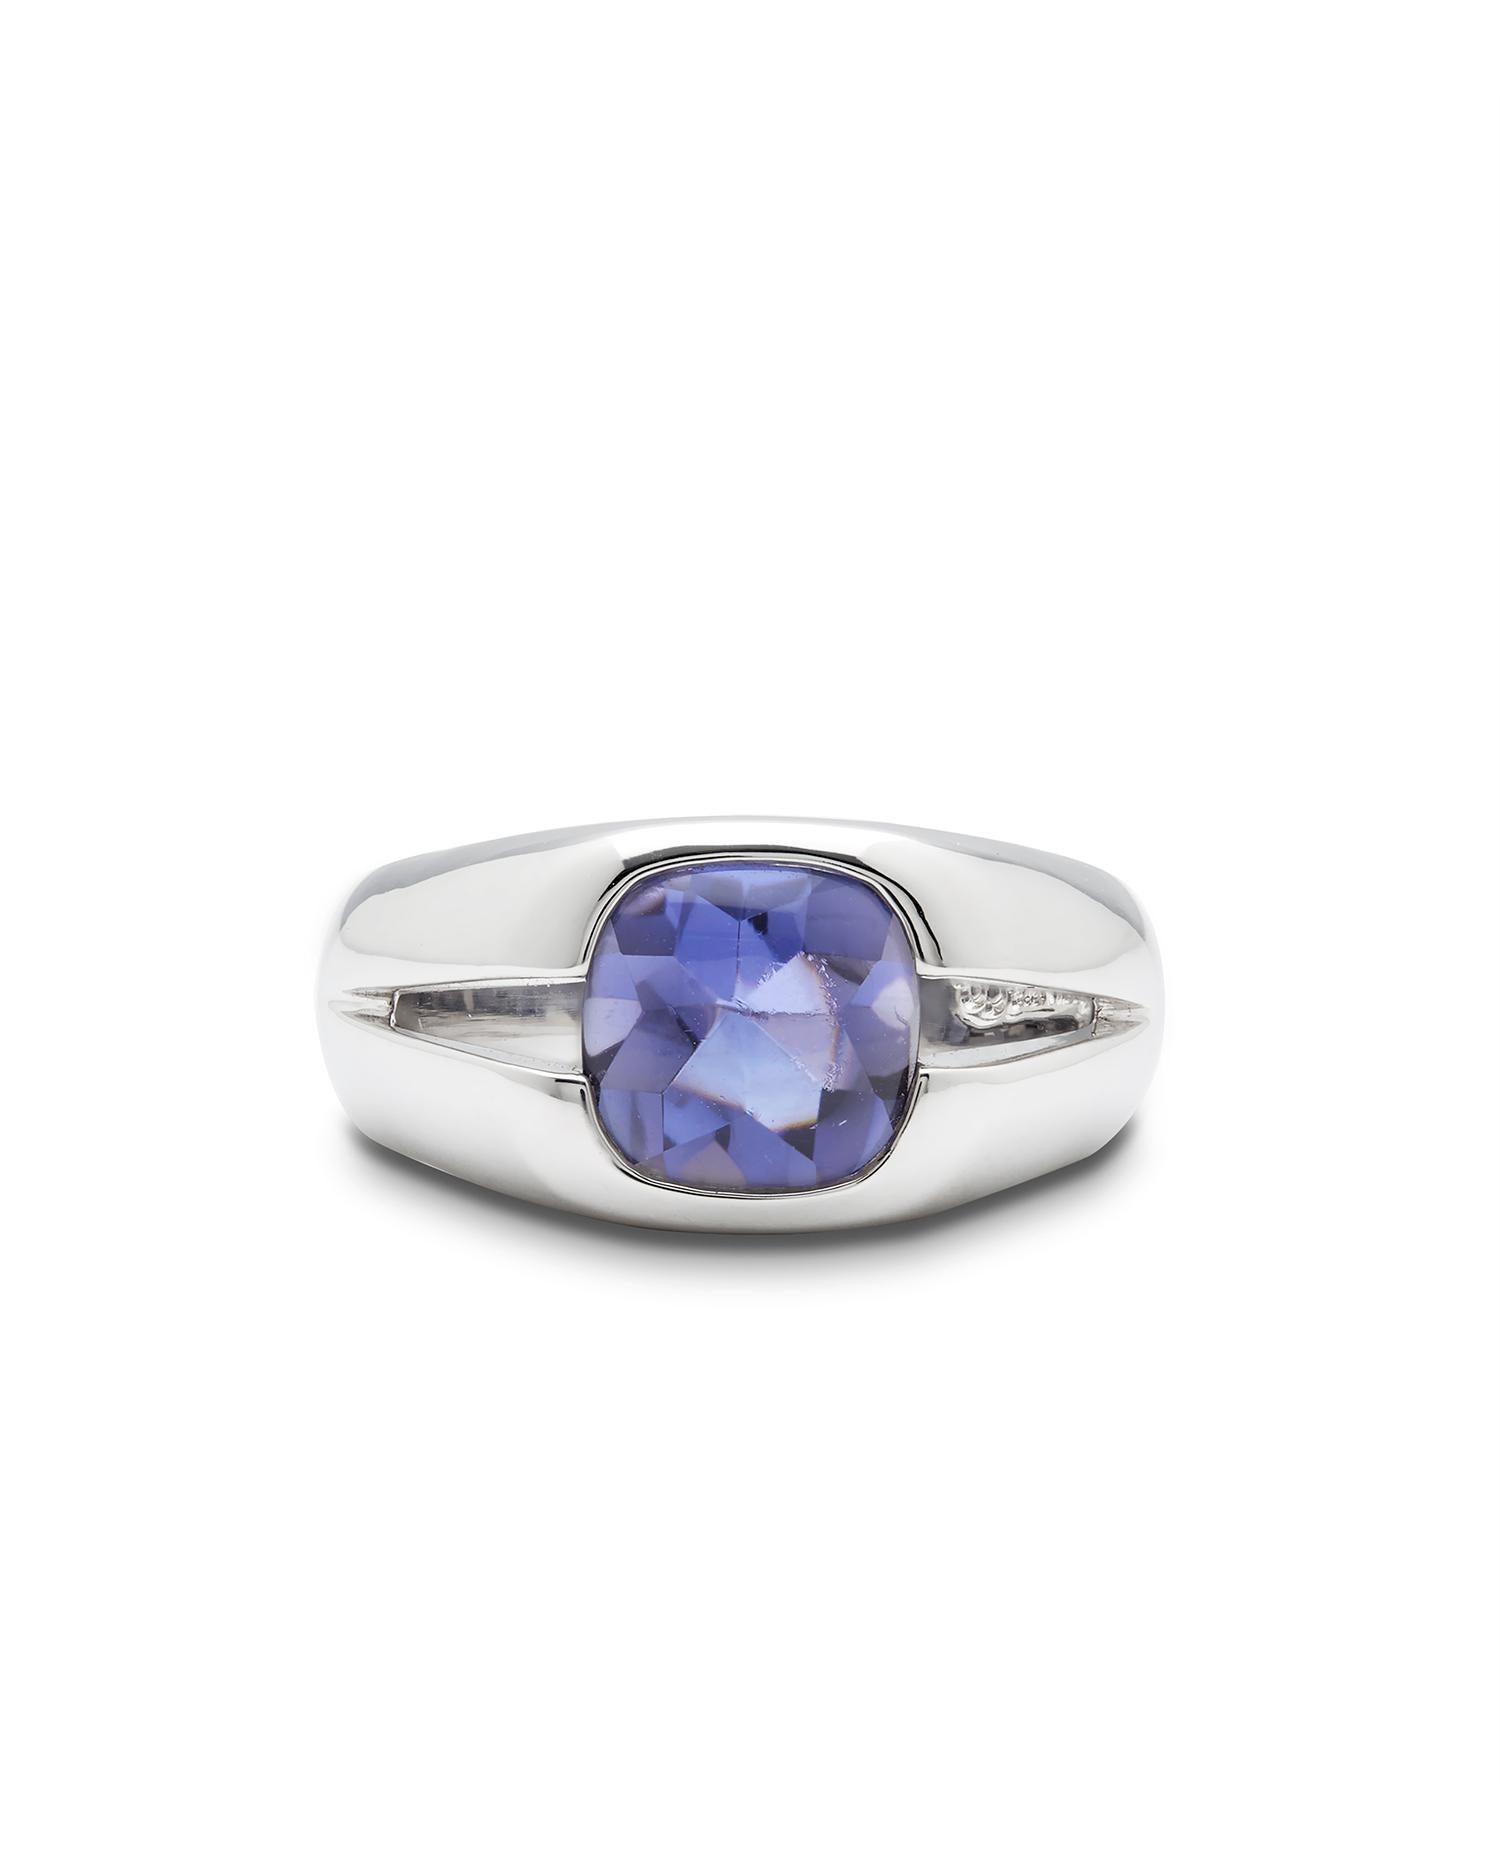 Iconic Tiffany & Co Rare Iolite ring Circa 2010 onwards

Tiffany & Co fancy Cabochon Iolite set ring, mounted in 18ct White gold and perfectly set lilac Iolite.

This ring comes in very good condition with little wear.

Stamped Tiffany & Co